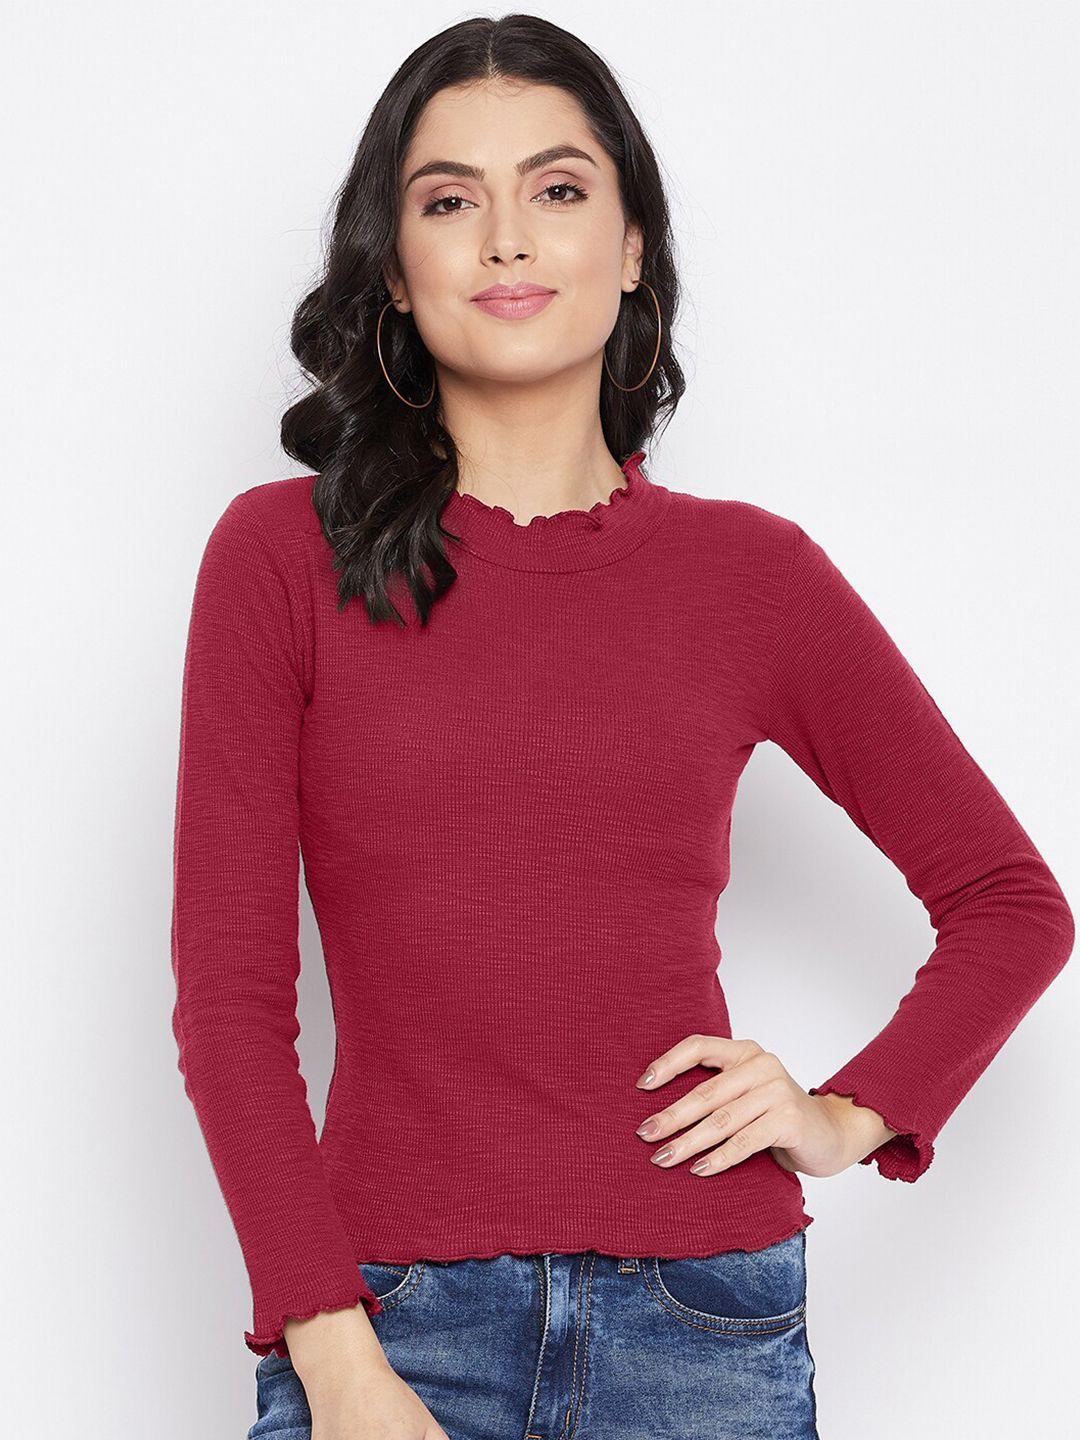 harbor n bay high neck long sleeves fitted top